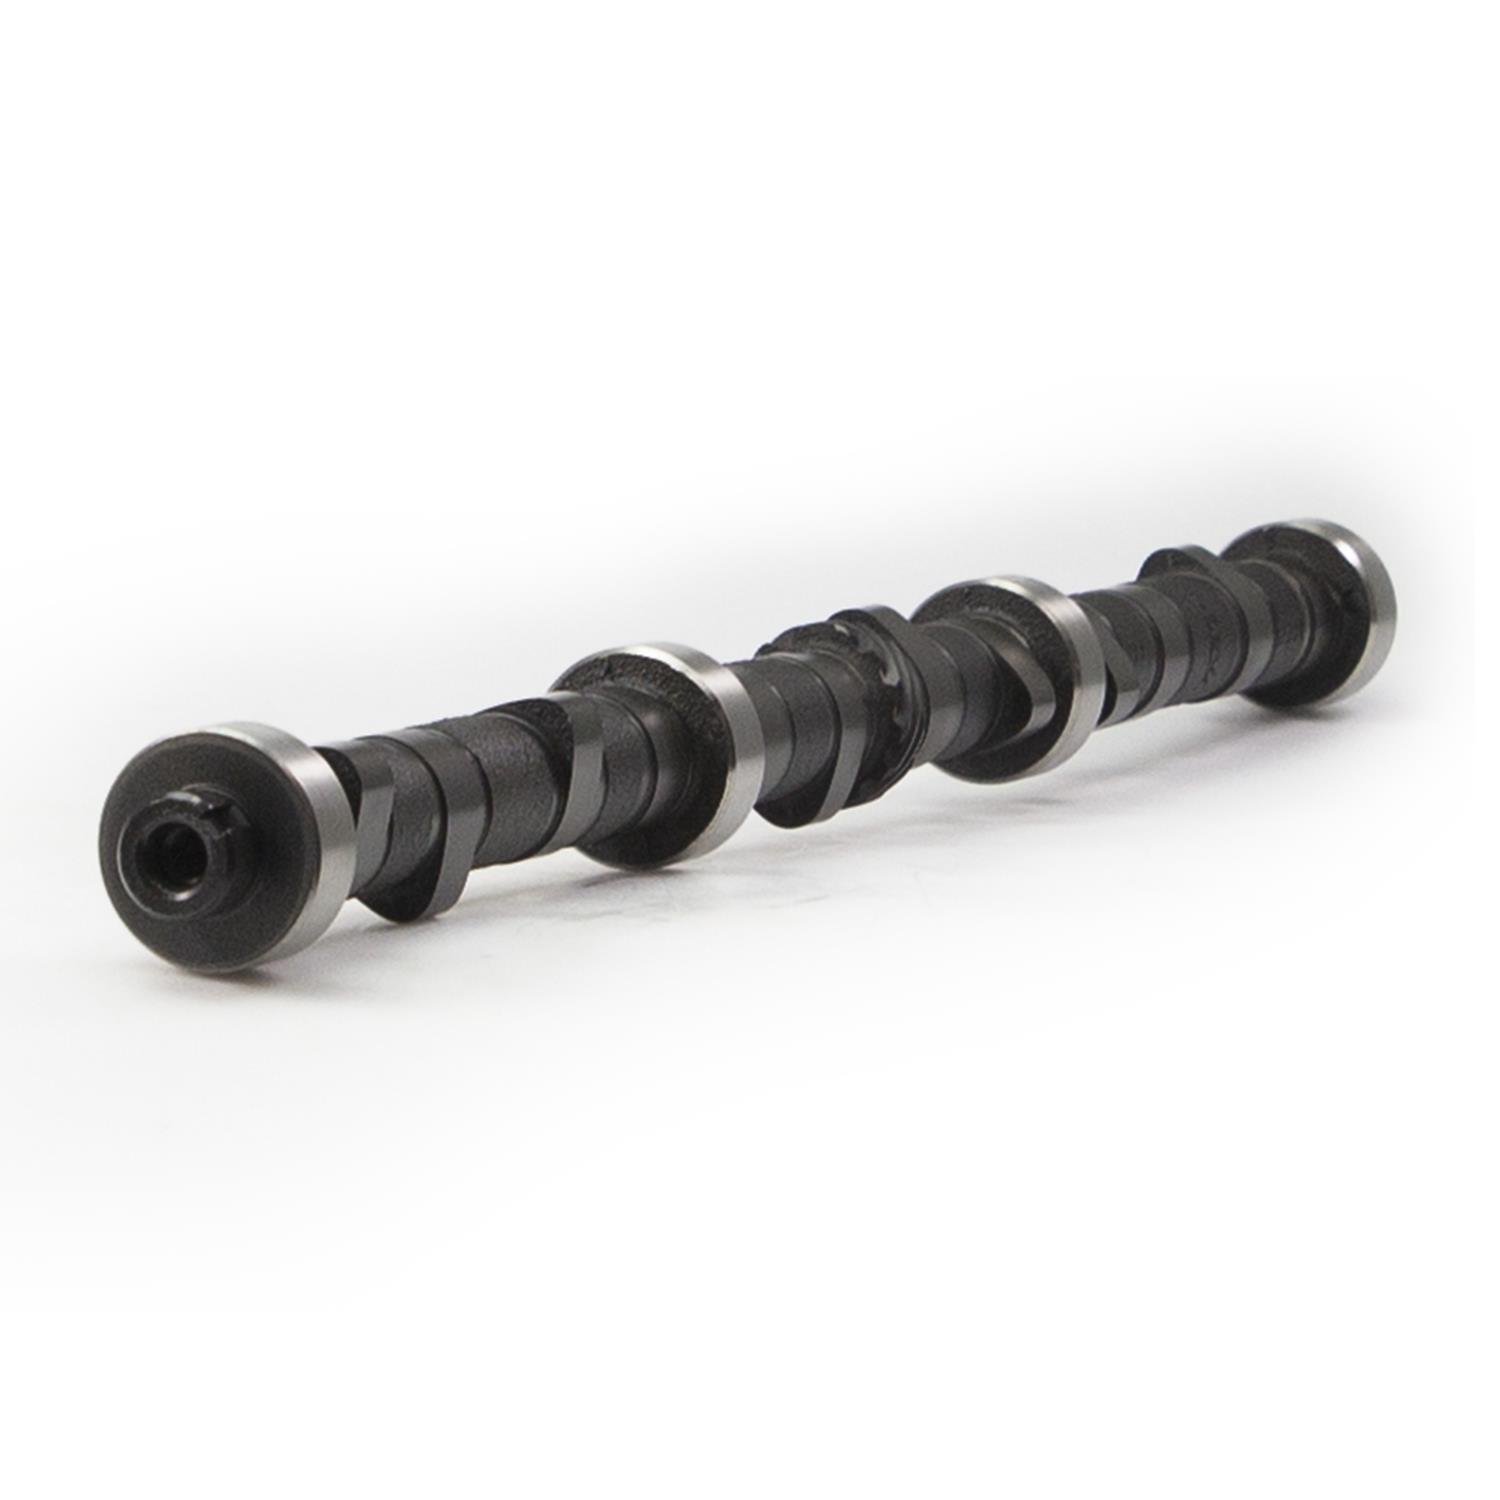 'Xtreme 4x4' Hydraulic Flat Tappet Camshaft for Select 1999-2006 Jeep Models with 4.0L Engine